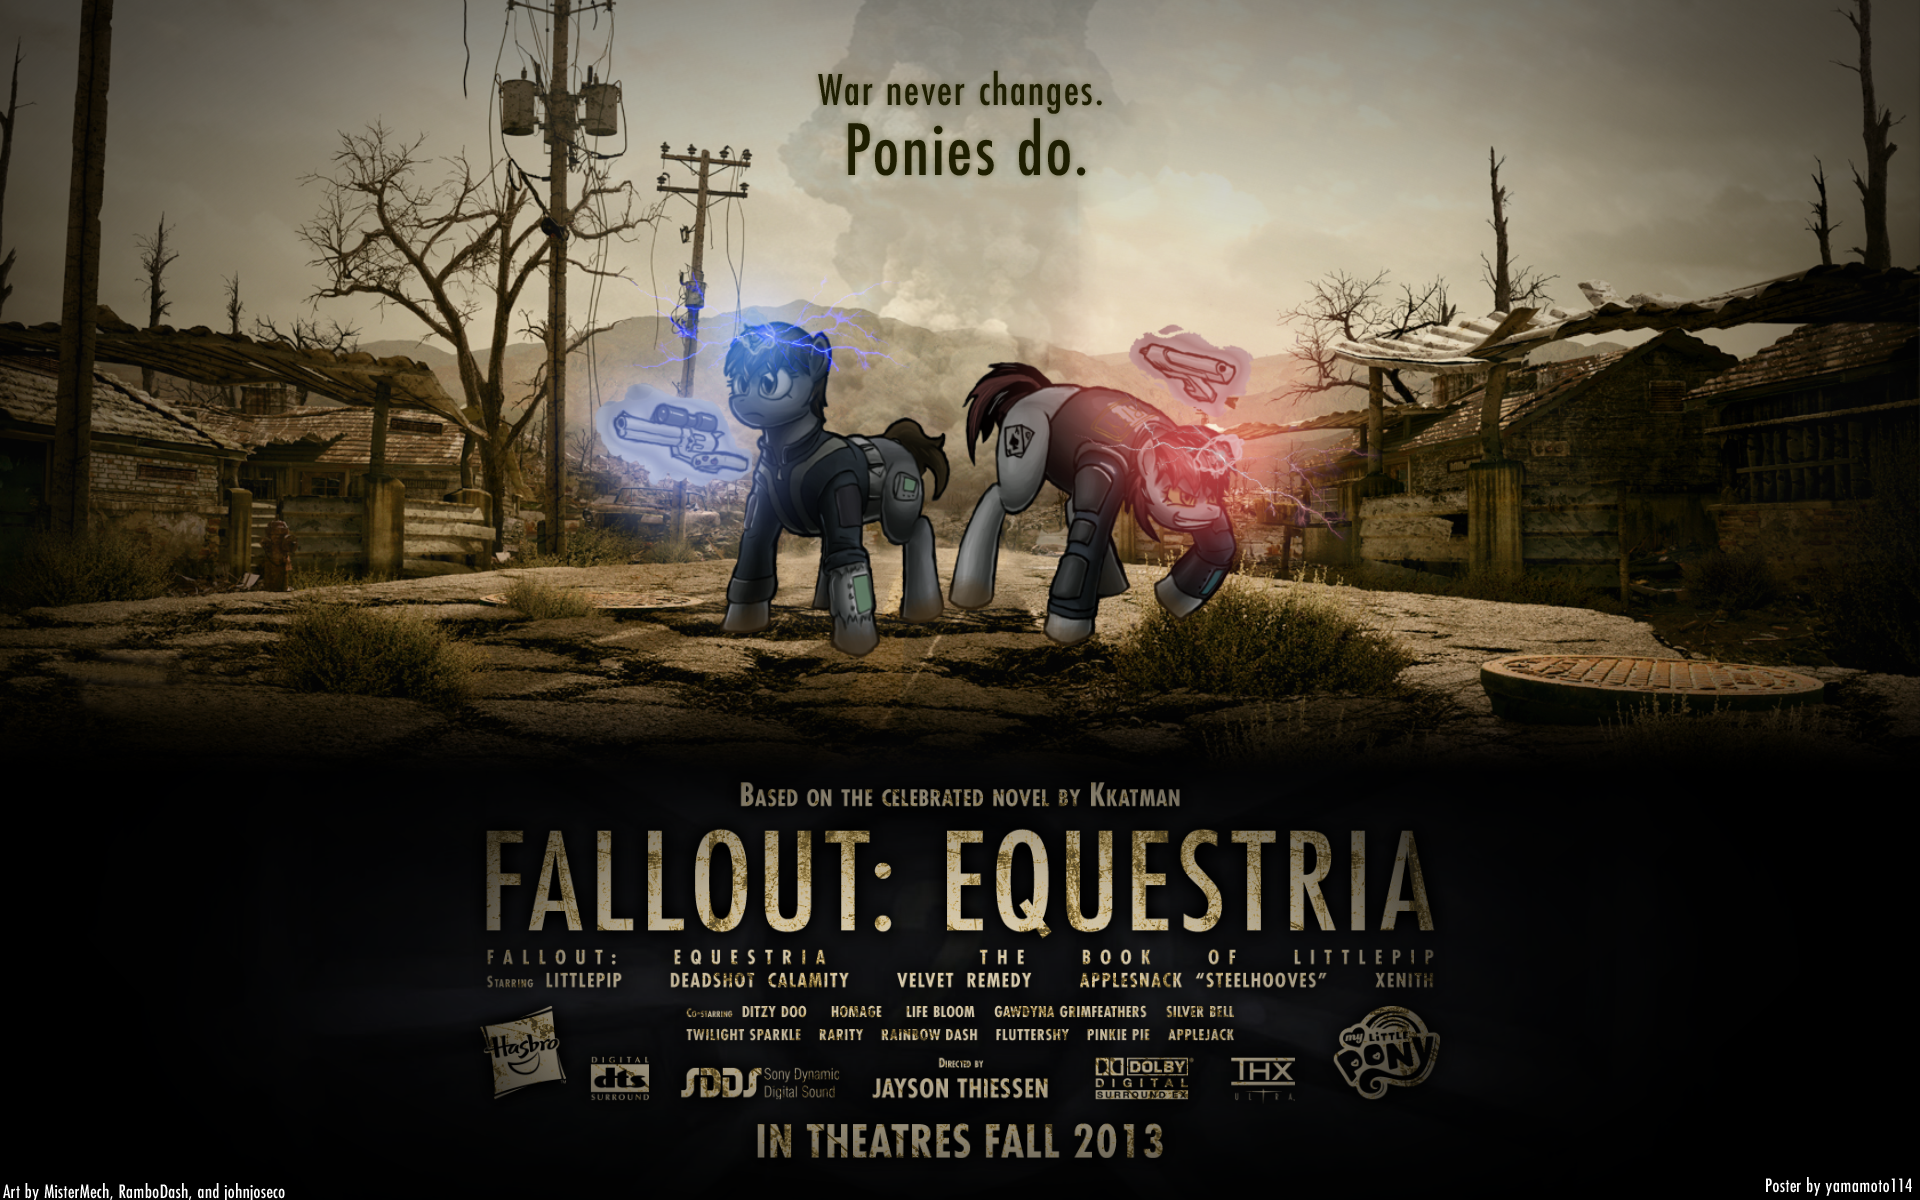 Fallout Equestria Movie Poster Concept (Wallpaper) by johnjoseco, MisterMech, RamboDash and yamamoto114